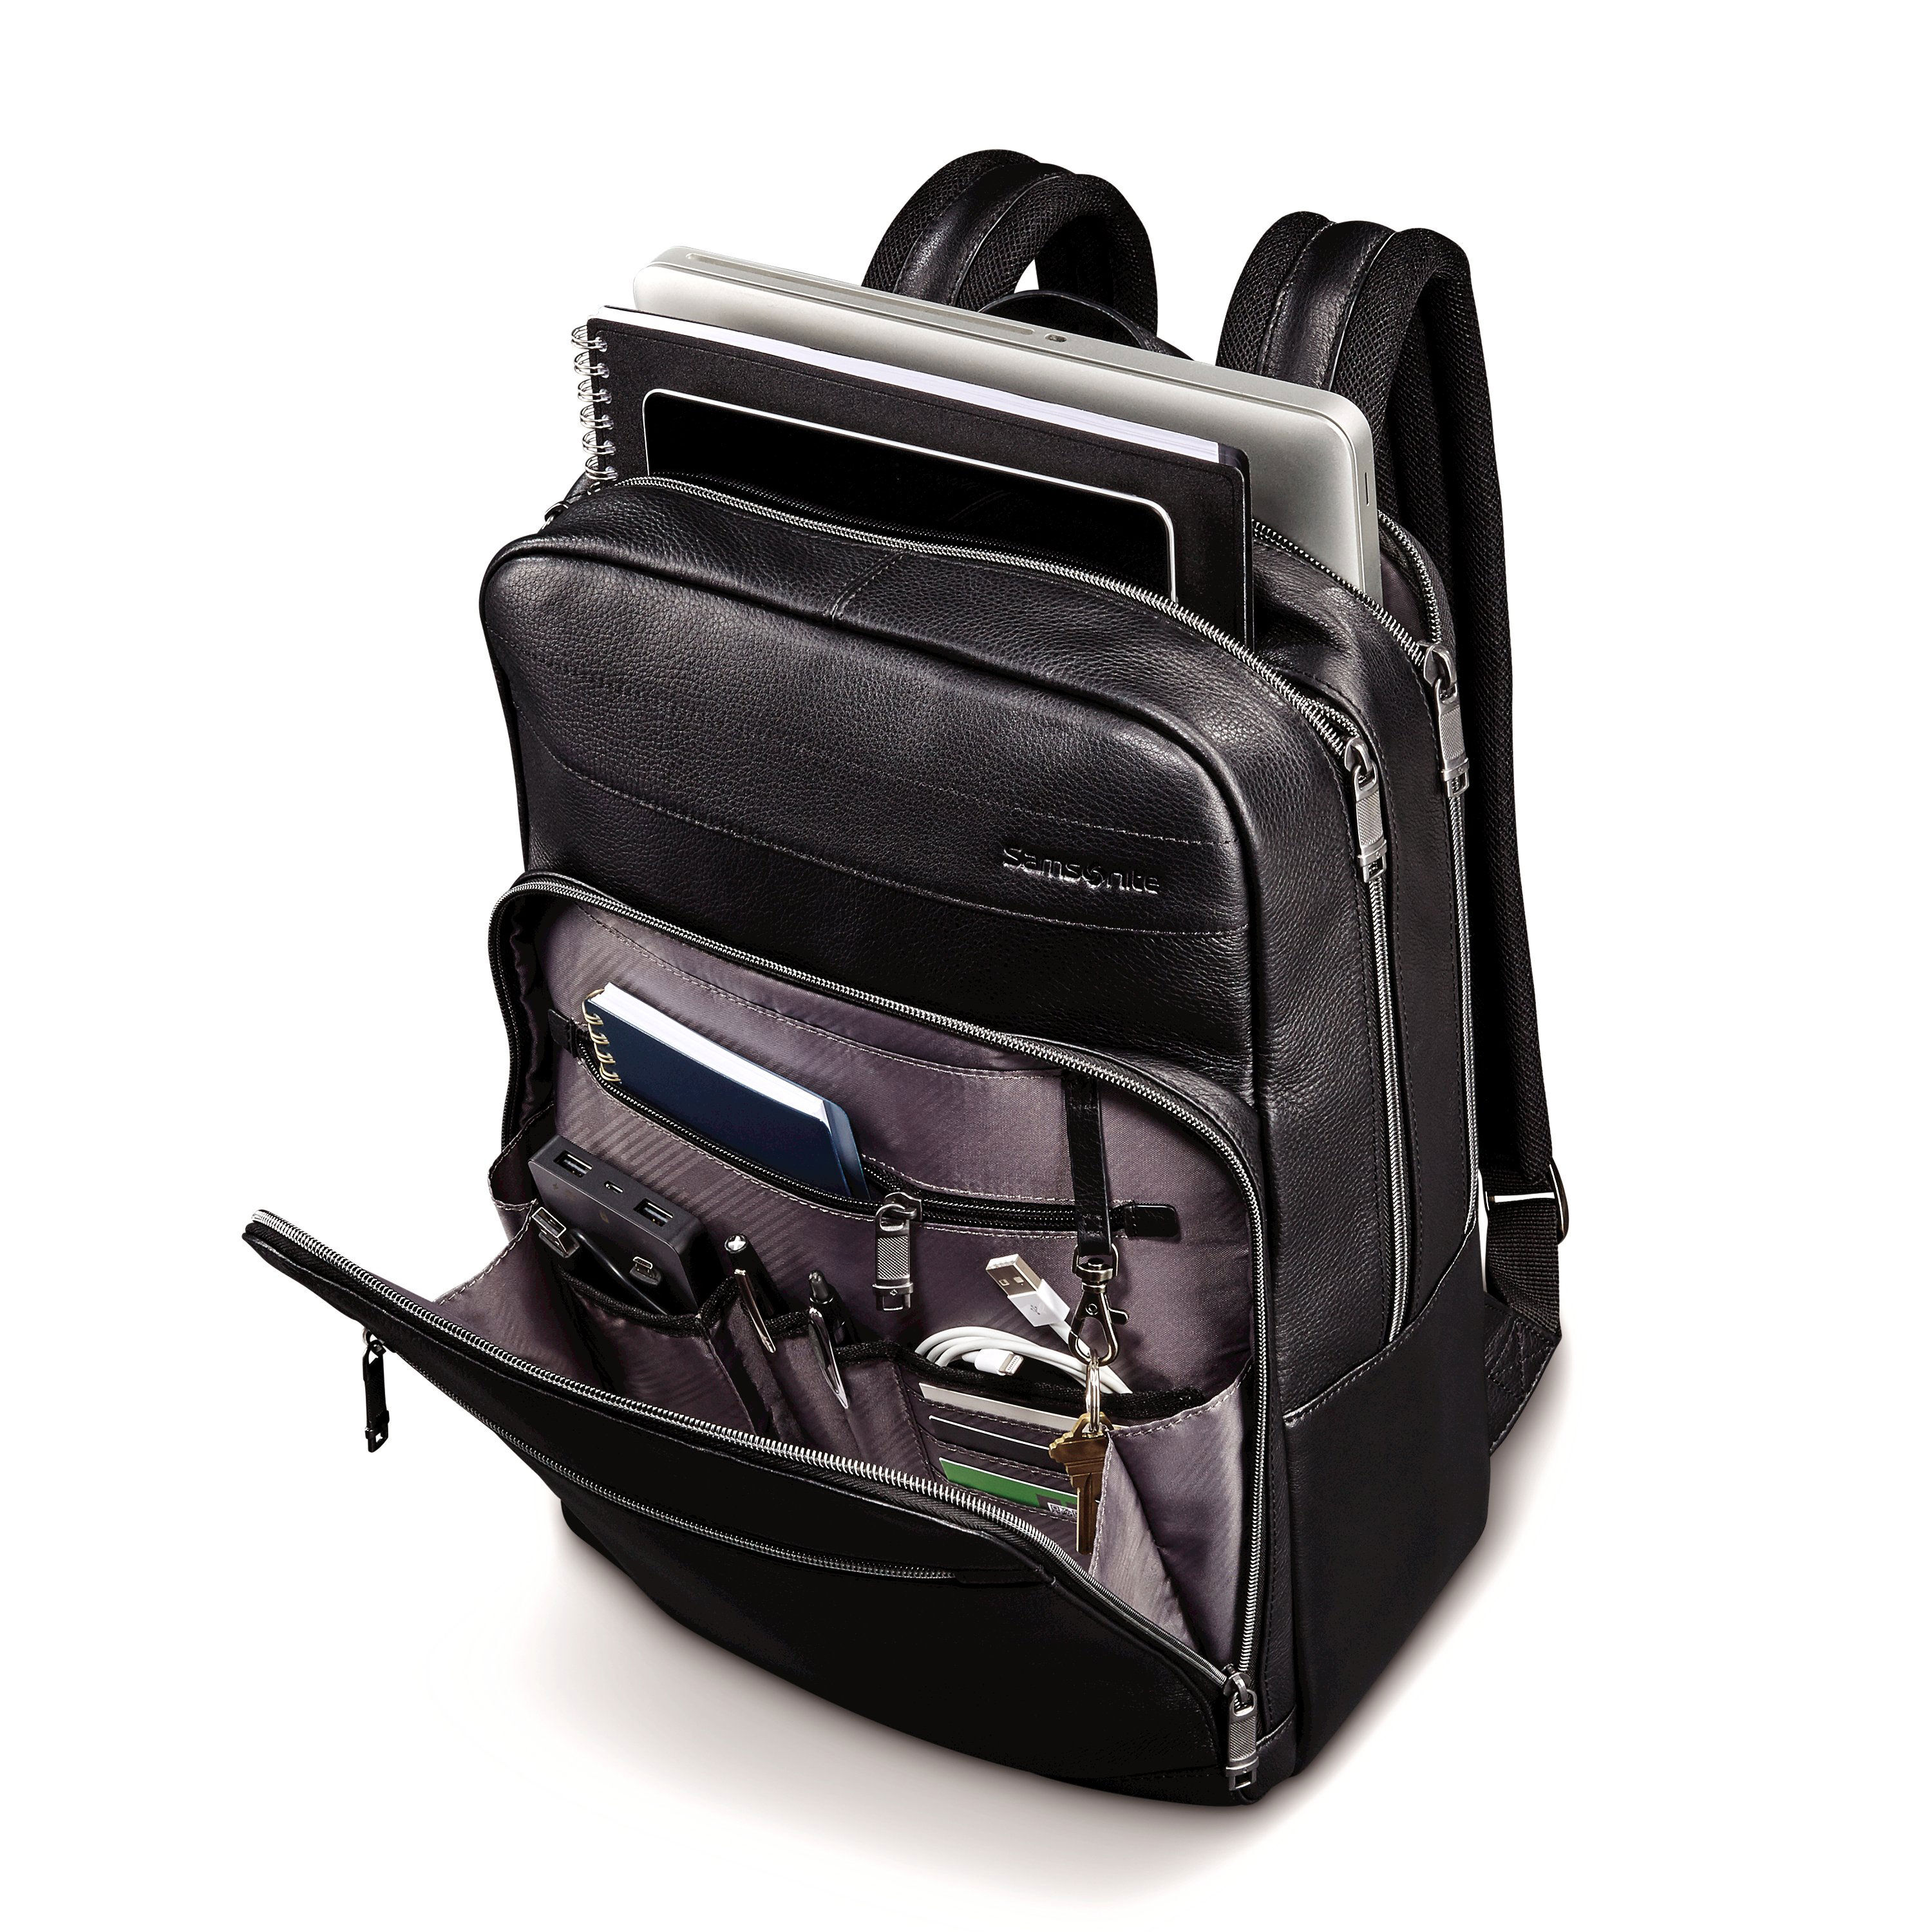 Best Laptop Backpacks - A Guide In Buying The Right Backpack For You